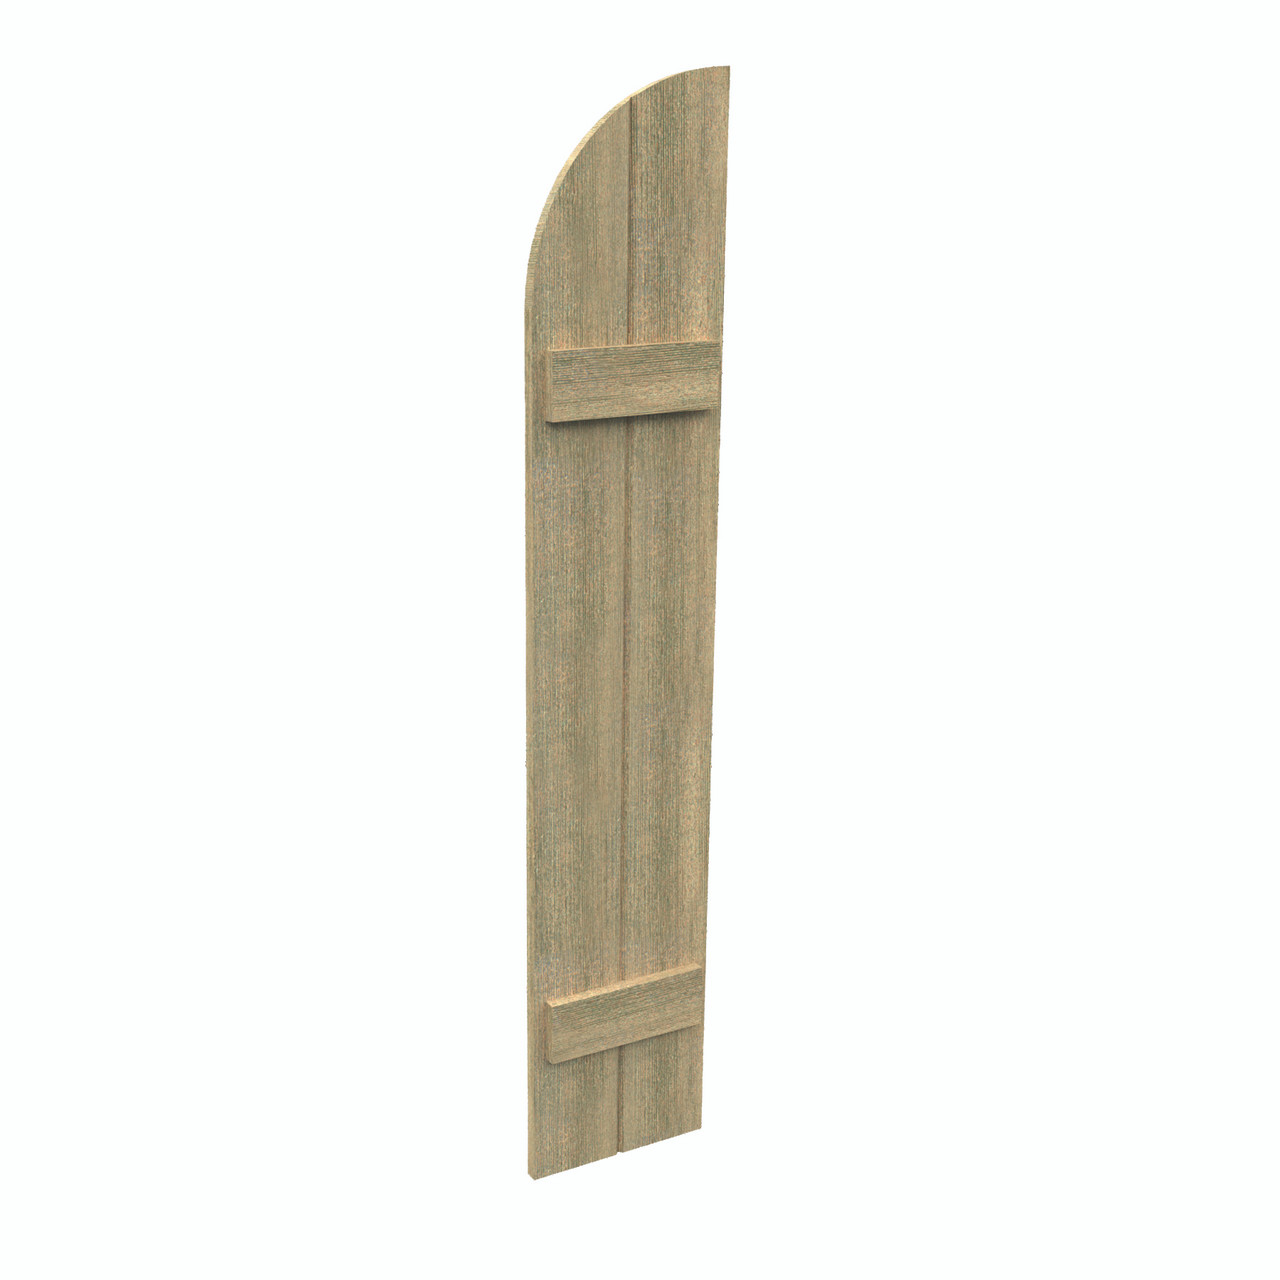 12 inch by 92 inch Quarter Round Shutter with 2-Boards